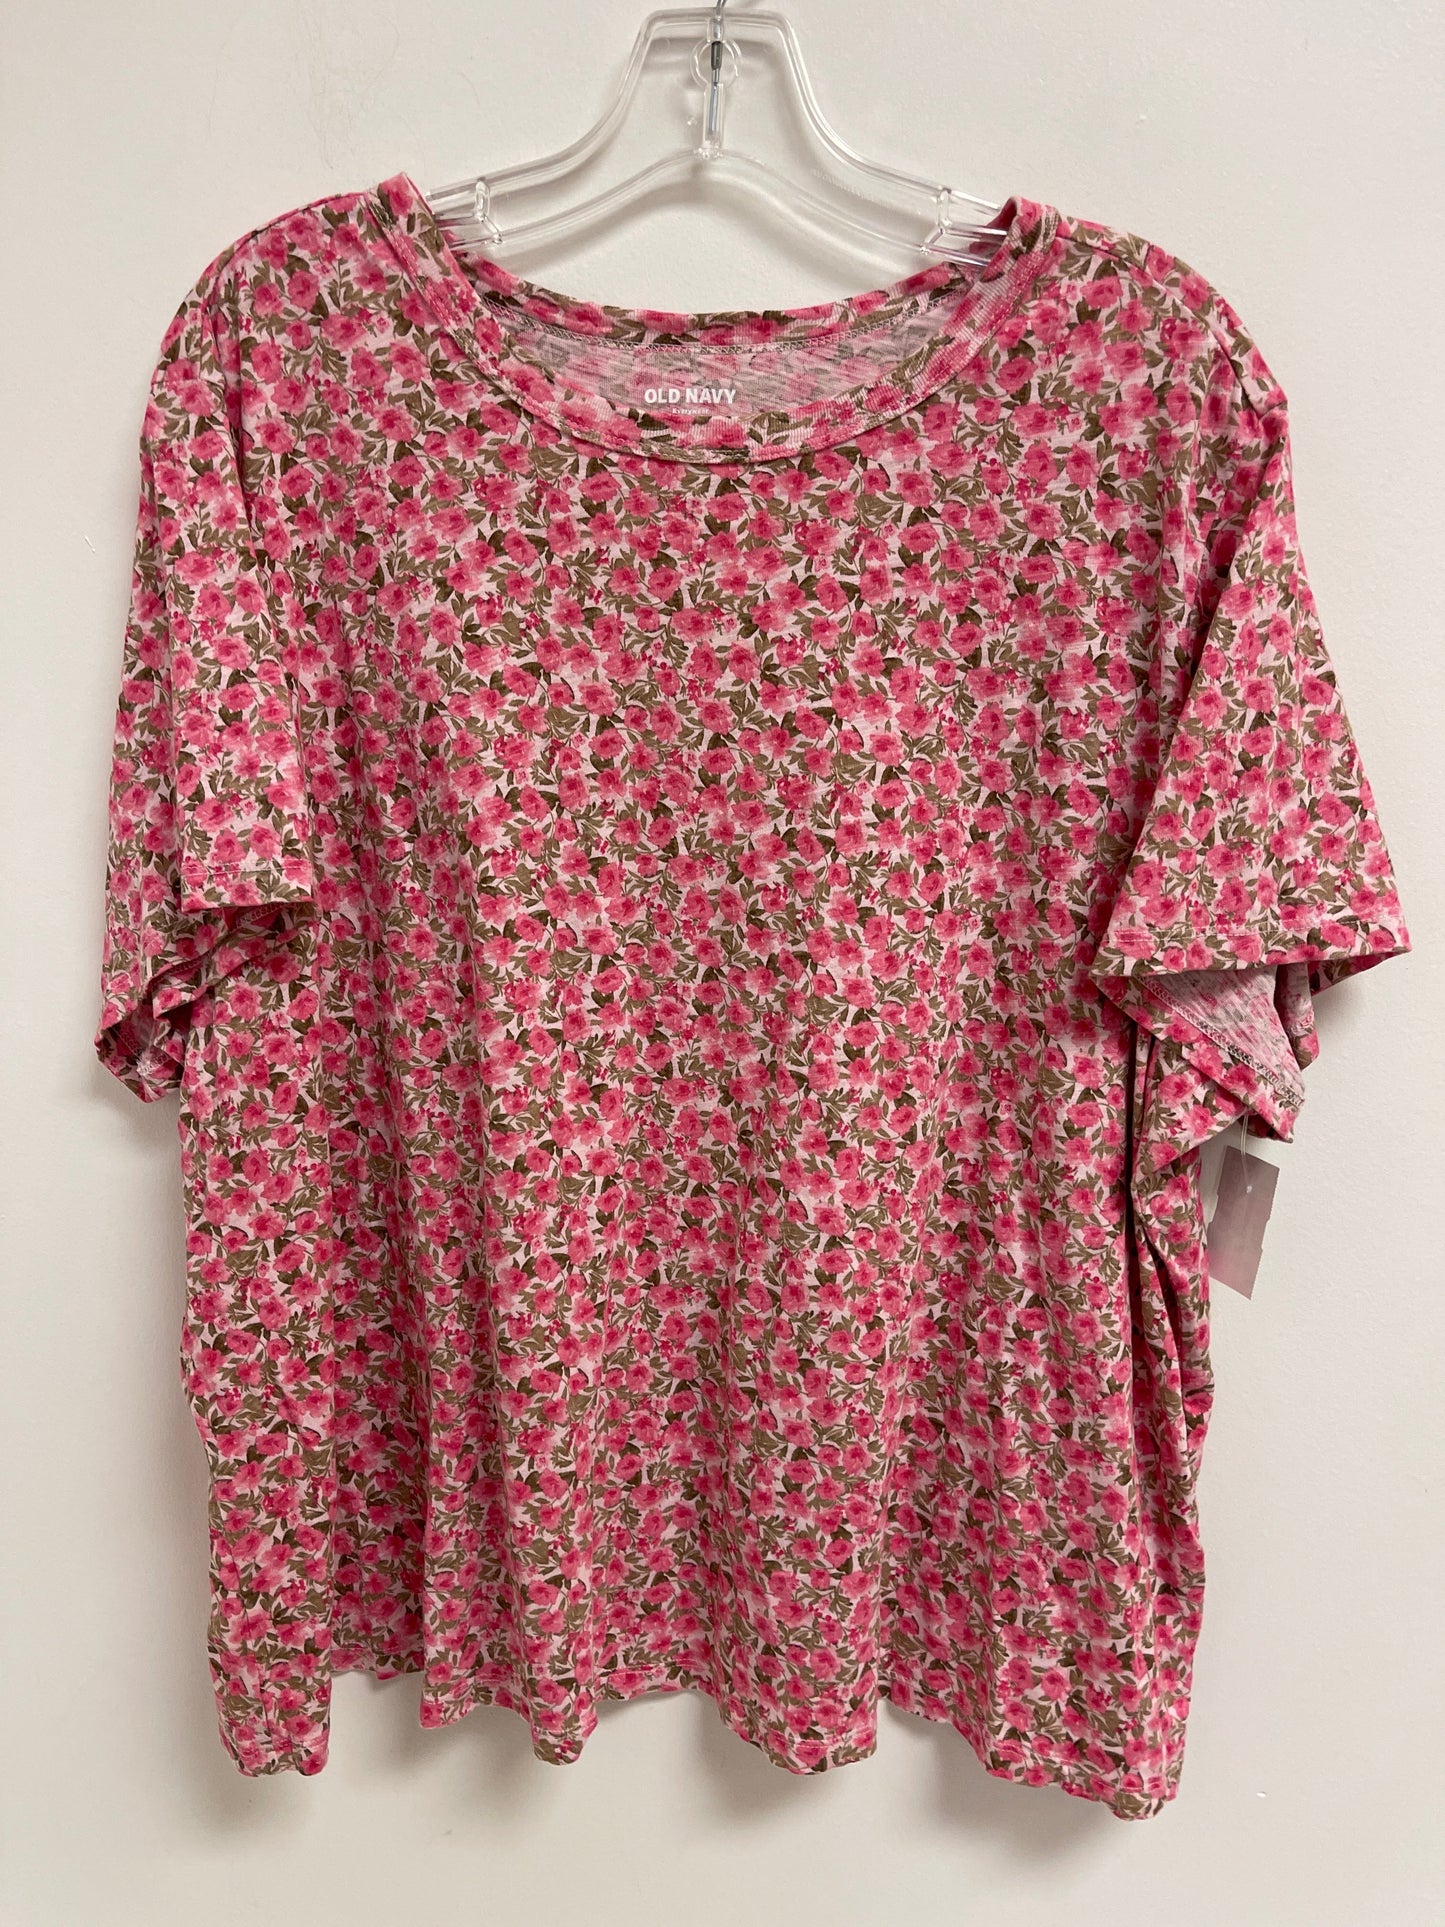 Pink Top Short Sleeve Basic Old Navy, Size 2x